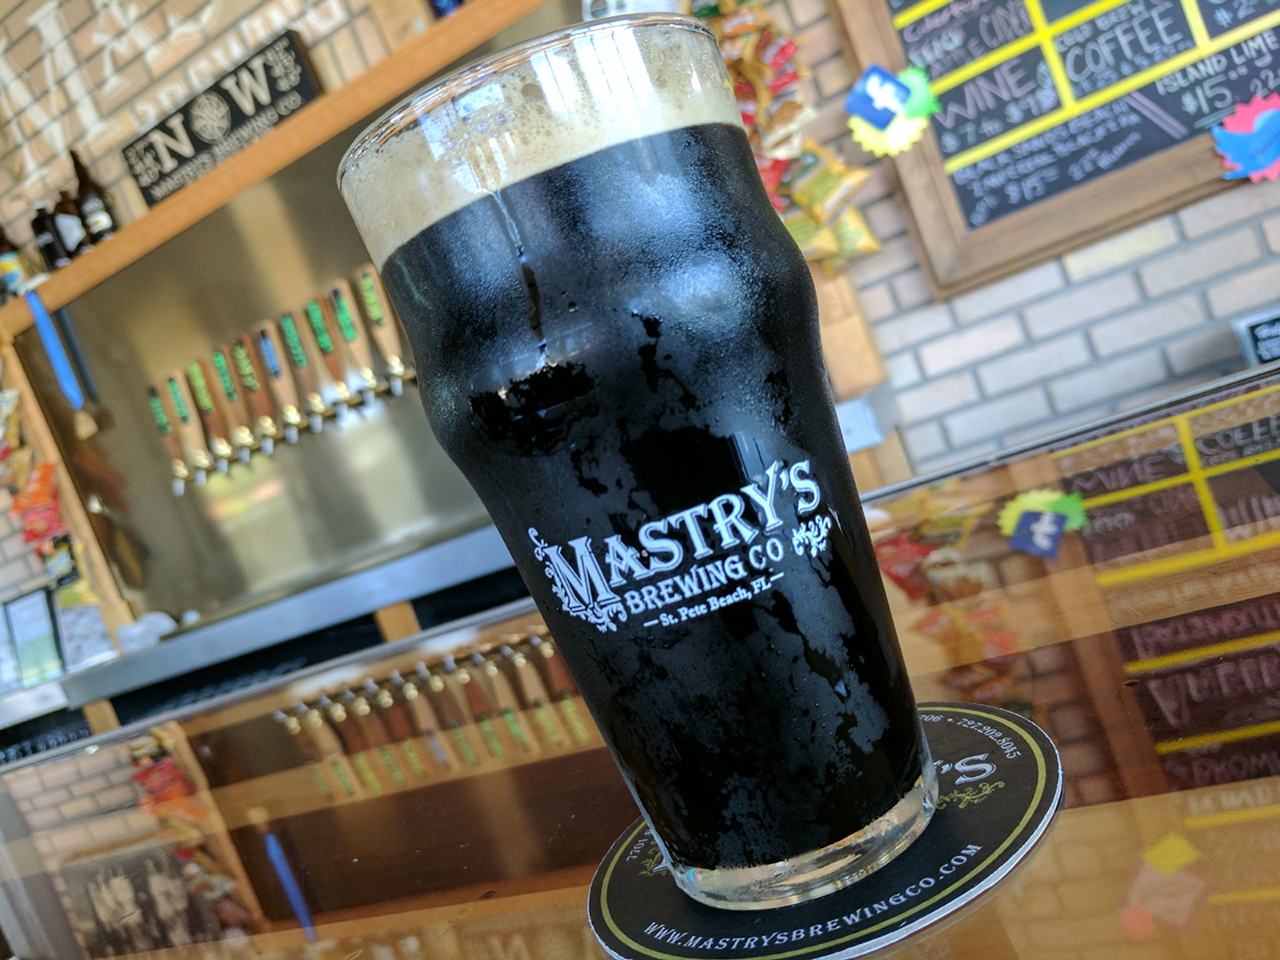 Head to another museum, the Museum of Fine Arts, for Beer Project collaboration brews from USF St. Petersburg's Brewing Arts Program and locals like Mastry's Brewing Co.